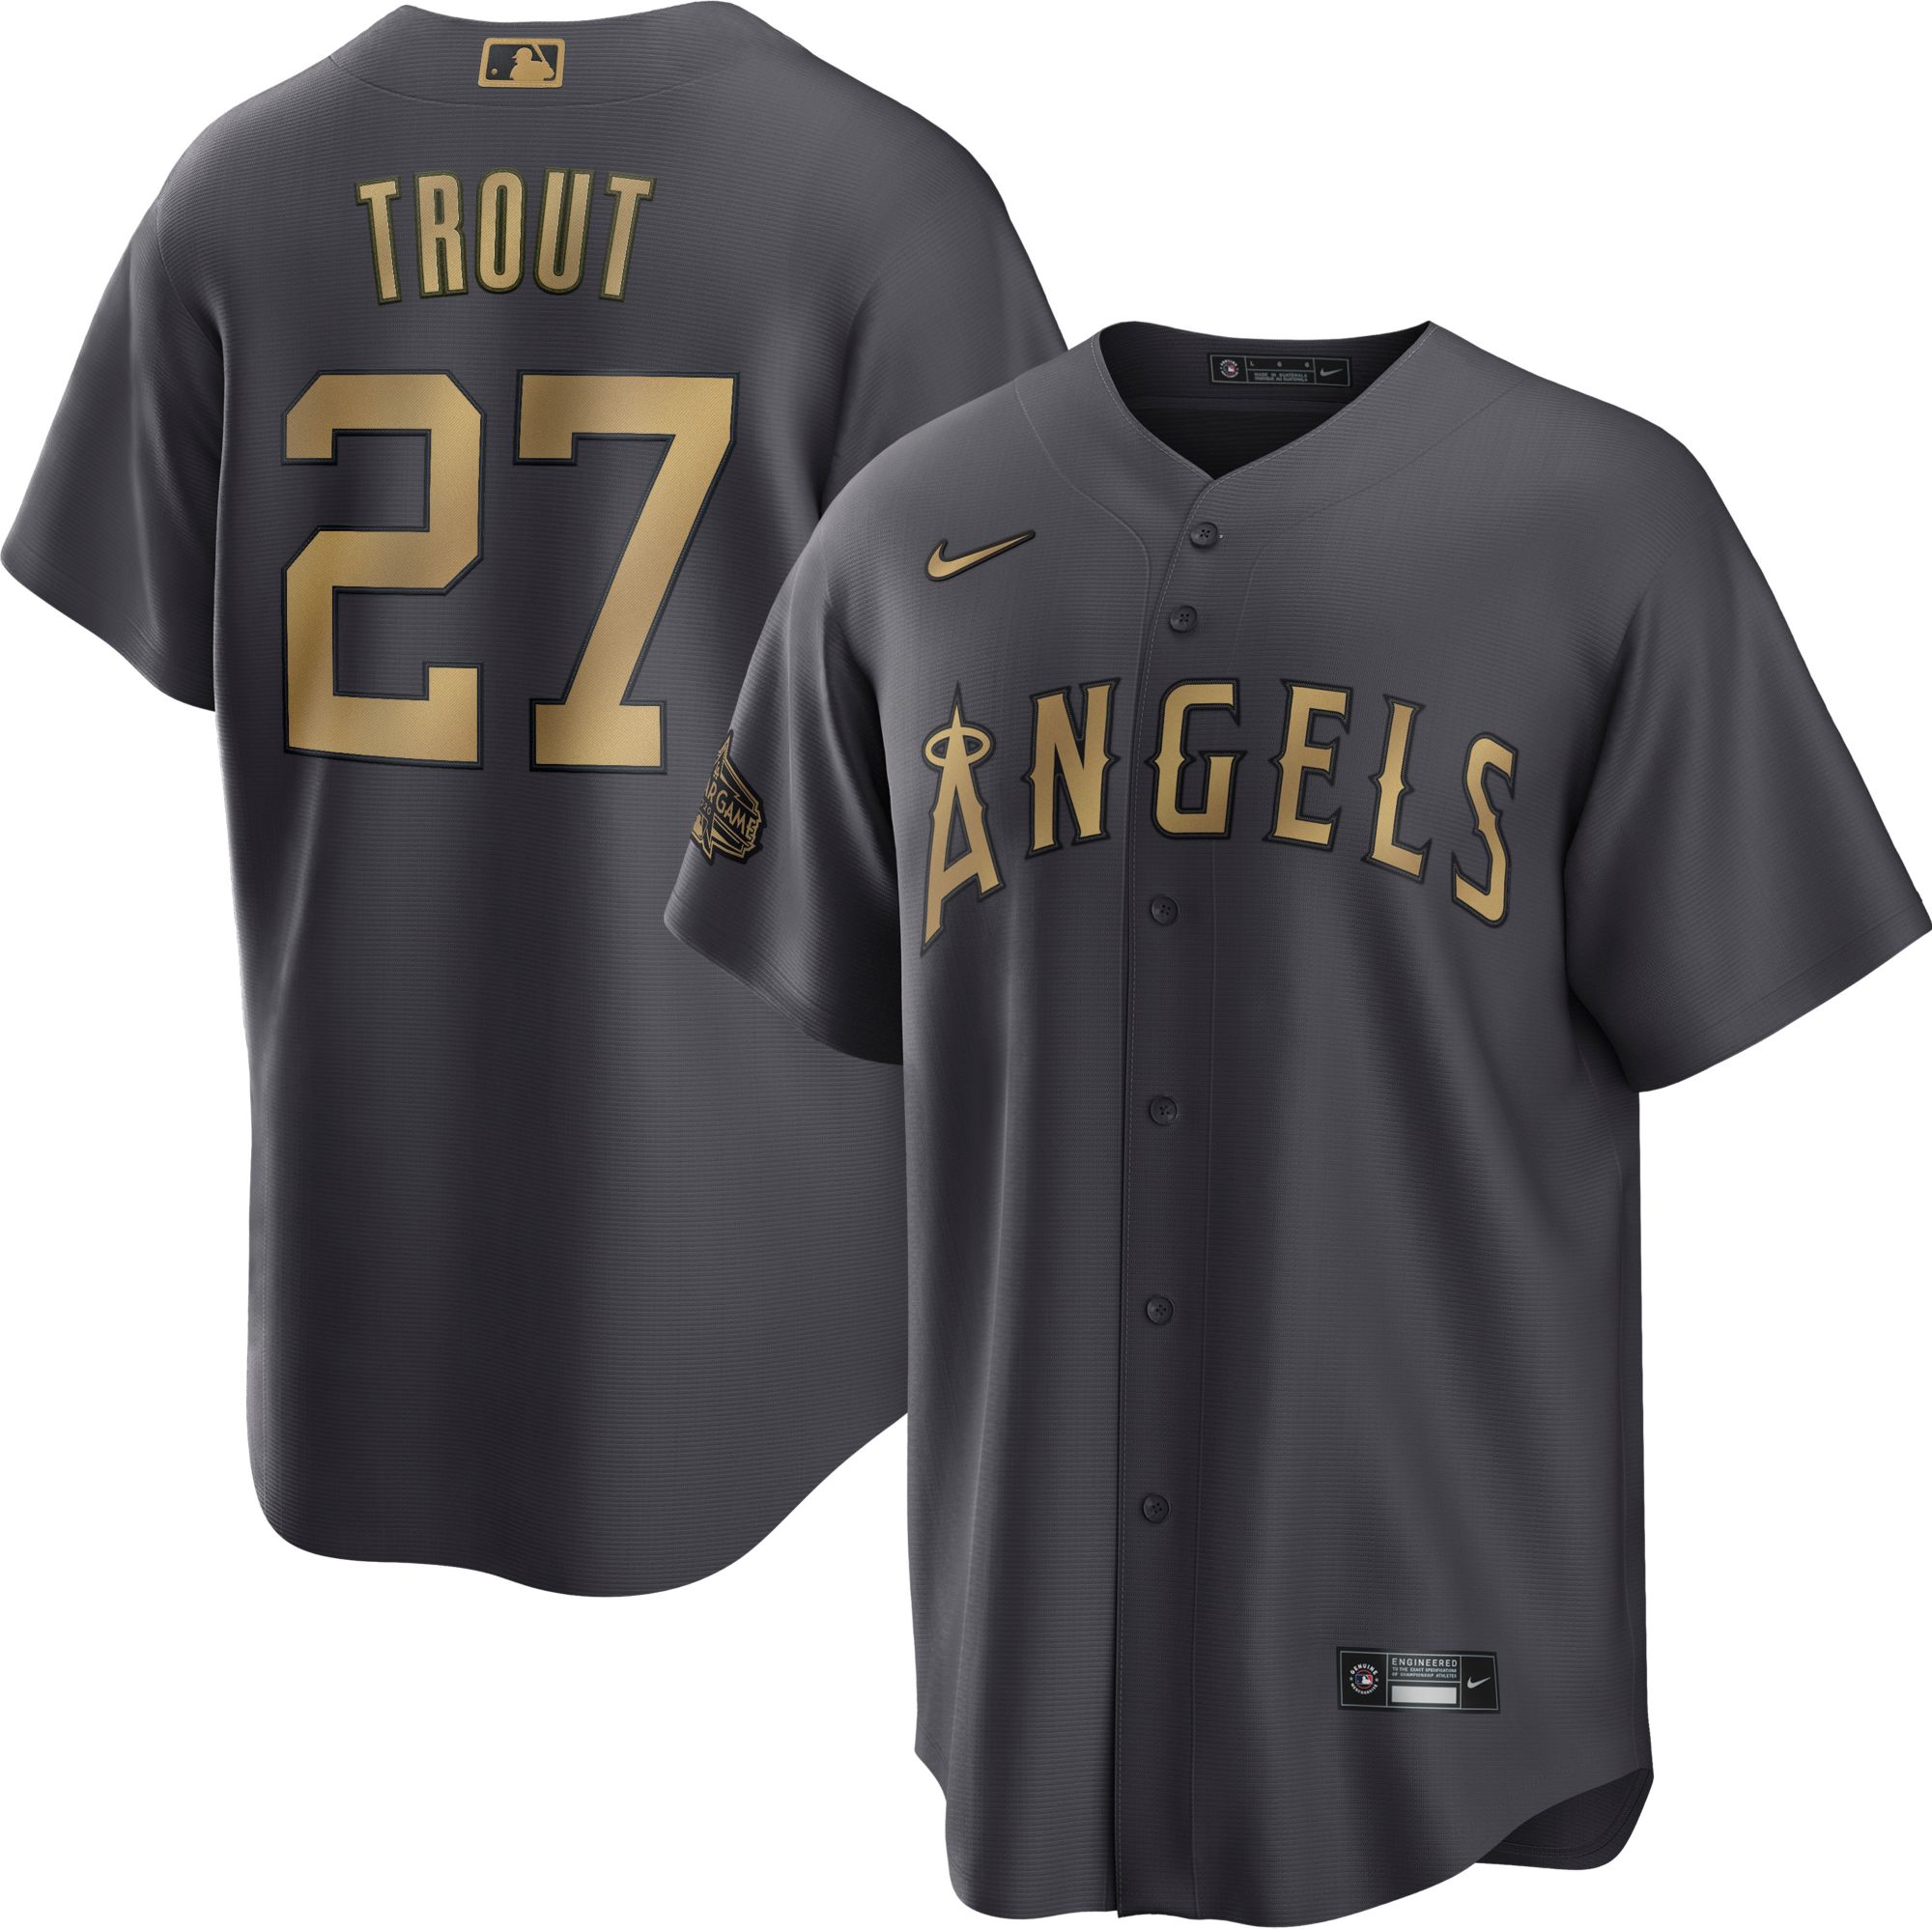 Sold at Auction: MLB Los Angeles Angels Nike #27 Trout Jersey